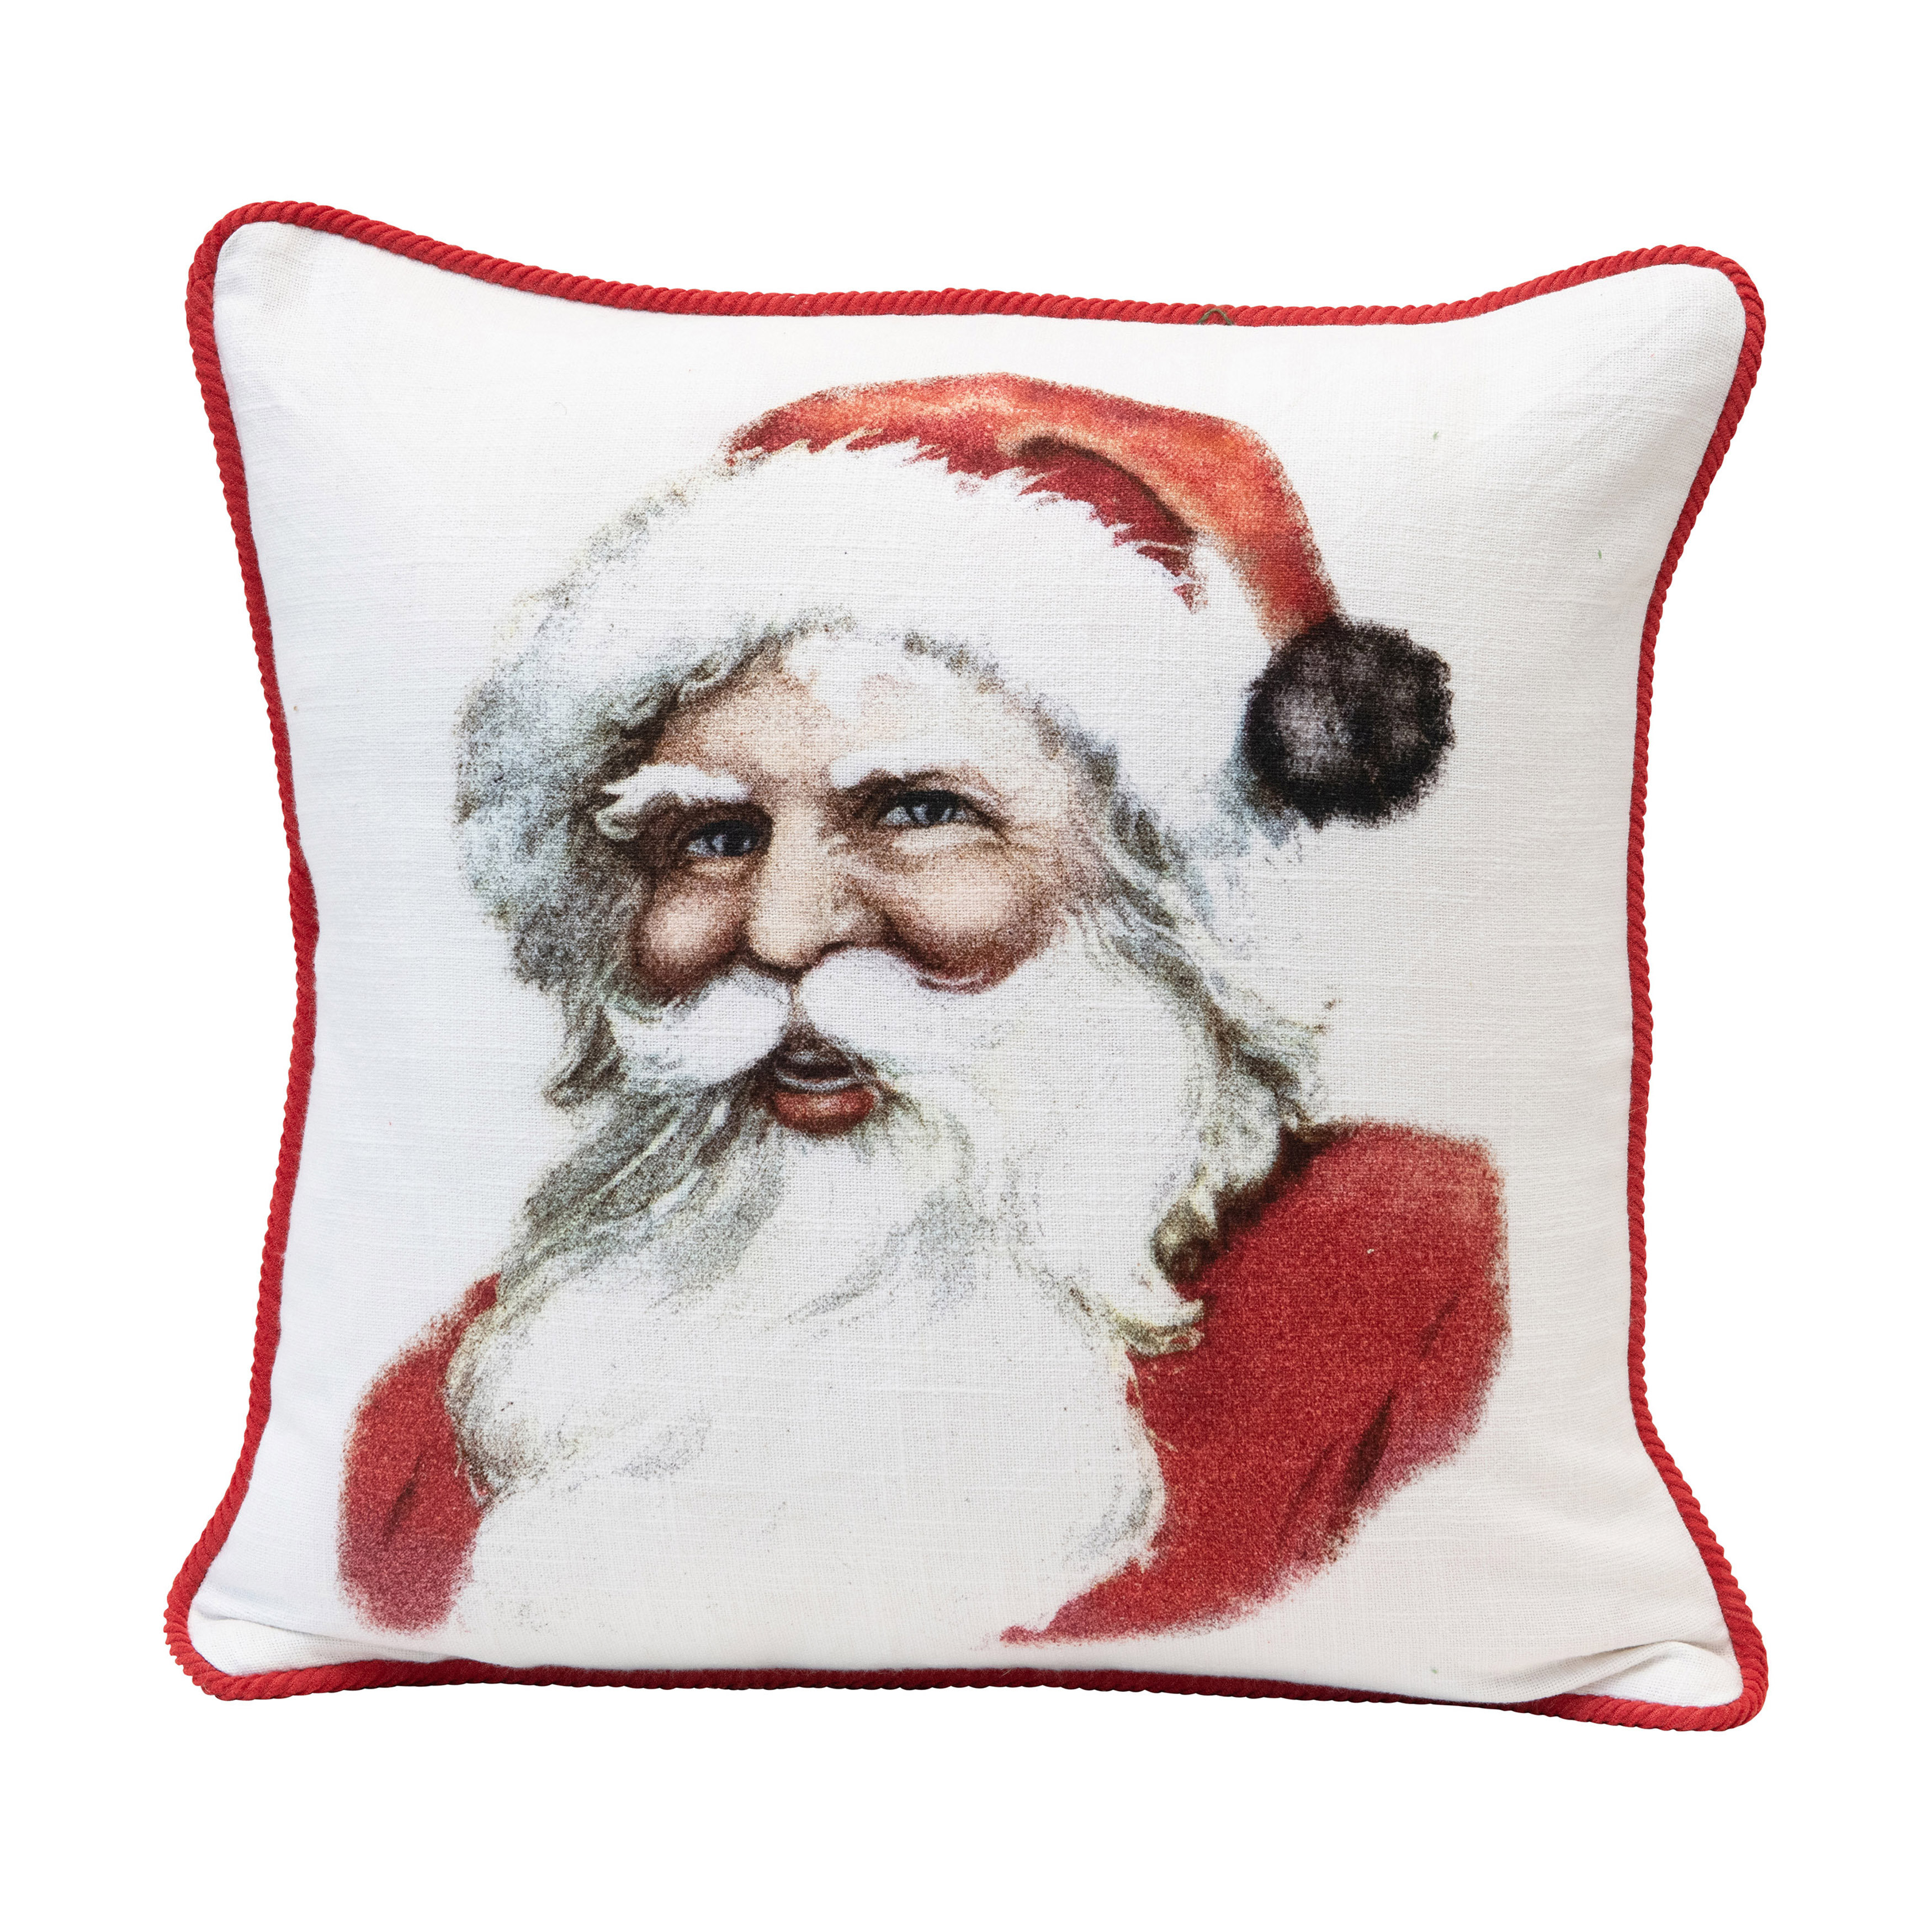 Multicolor Santa Is Watching Funny Christmas Throw Pillow 18x18 